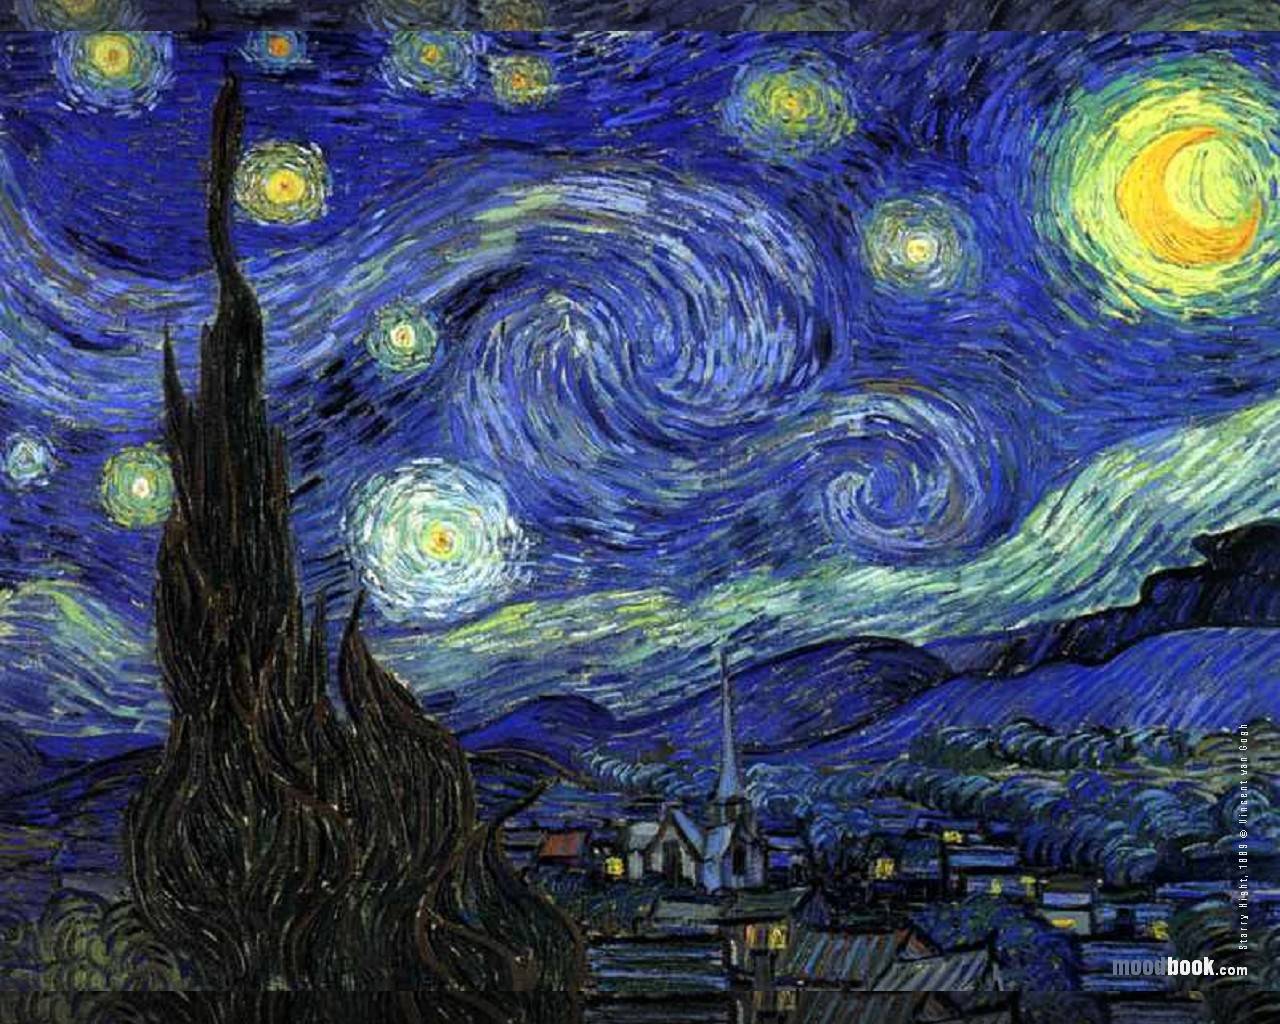 The Starry Night by Vincent van Gogh - ARTWORKS Illustrations